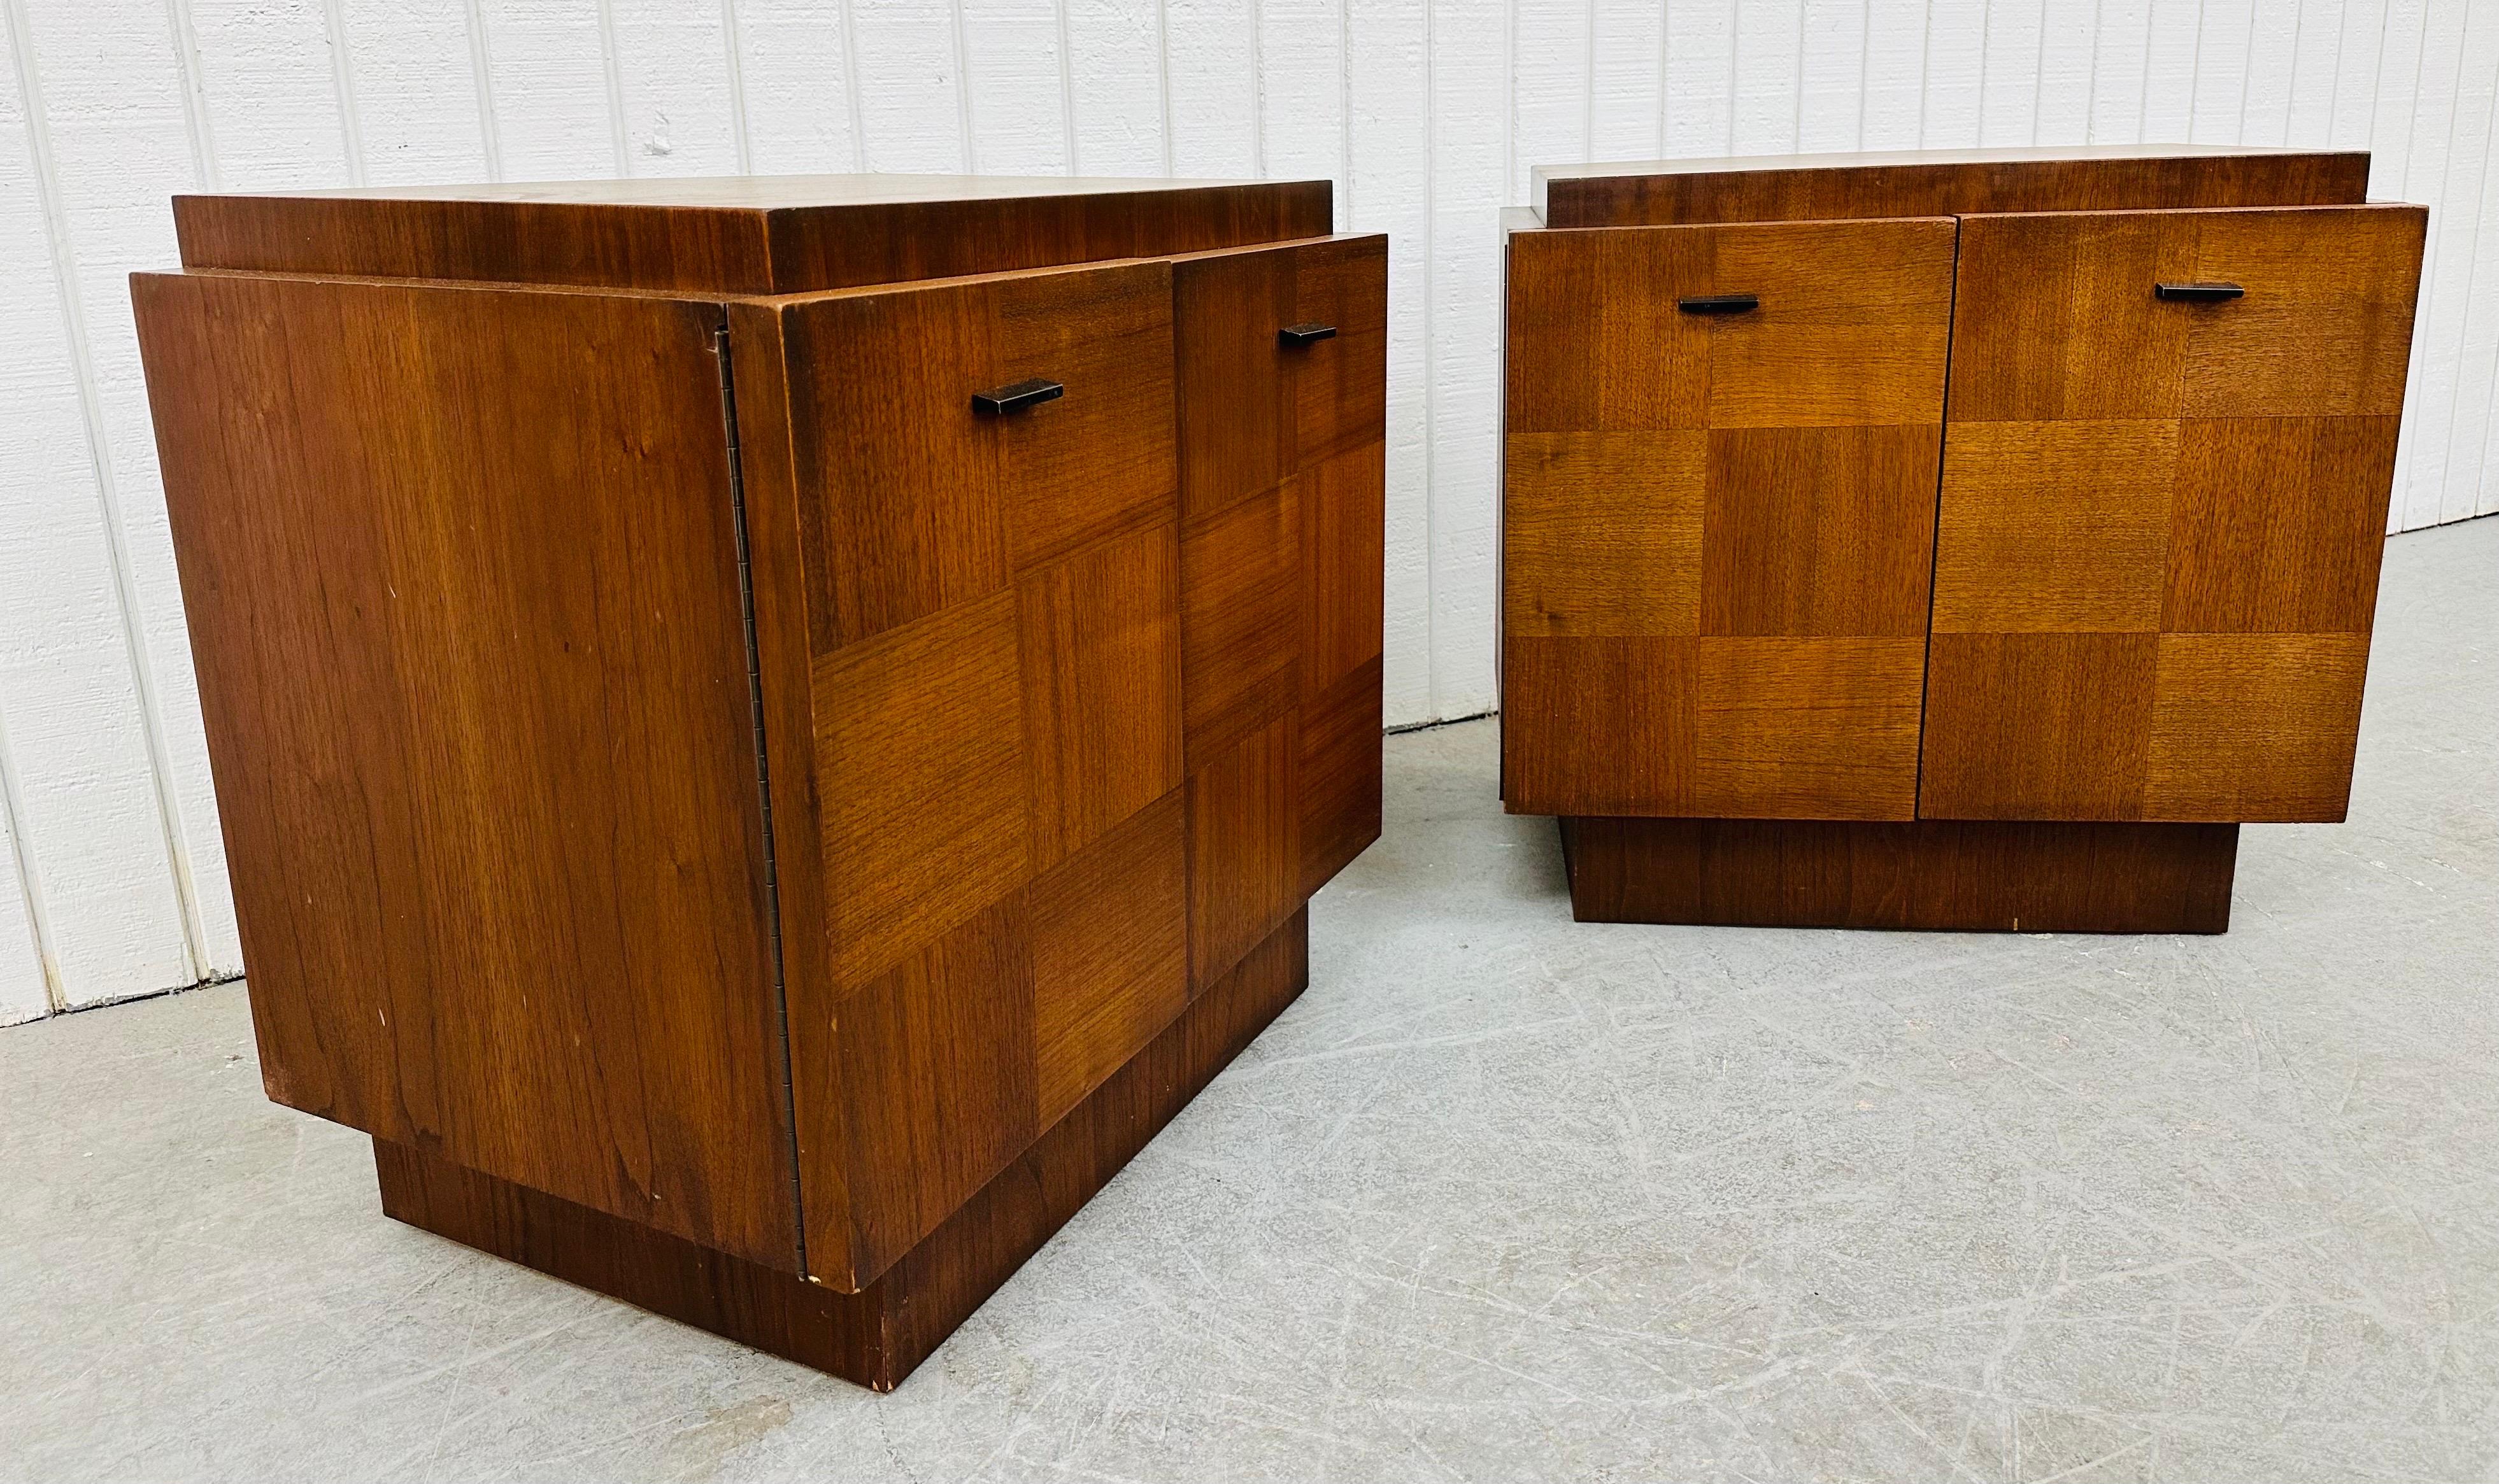 This listing is for a pair of Mid-Century Modern Brutalist Walnut Nightstands. Featuring a straight line cube design, brutalist style checkerboard design, plinth base, black pulls, and a beautiful finish. This is an exceptional combination of